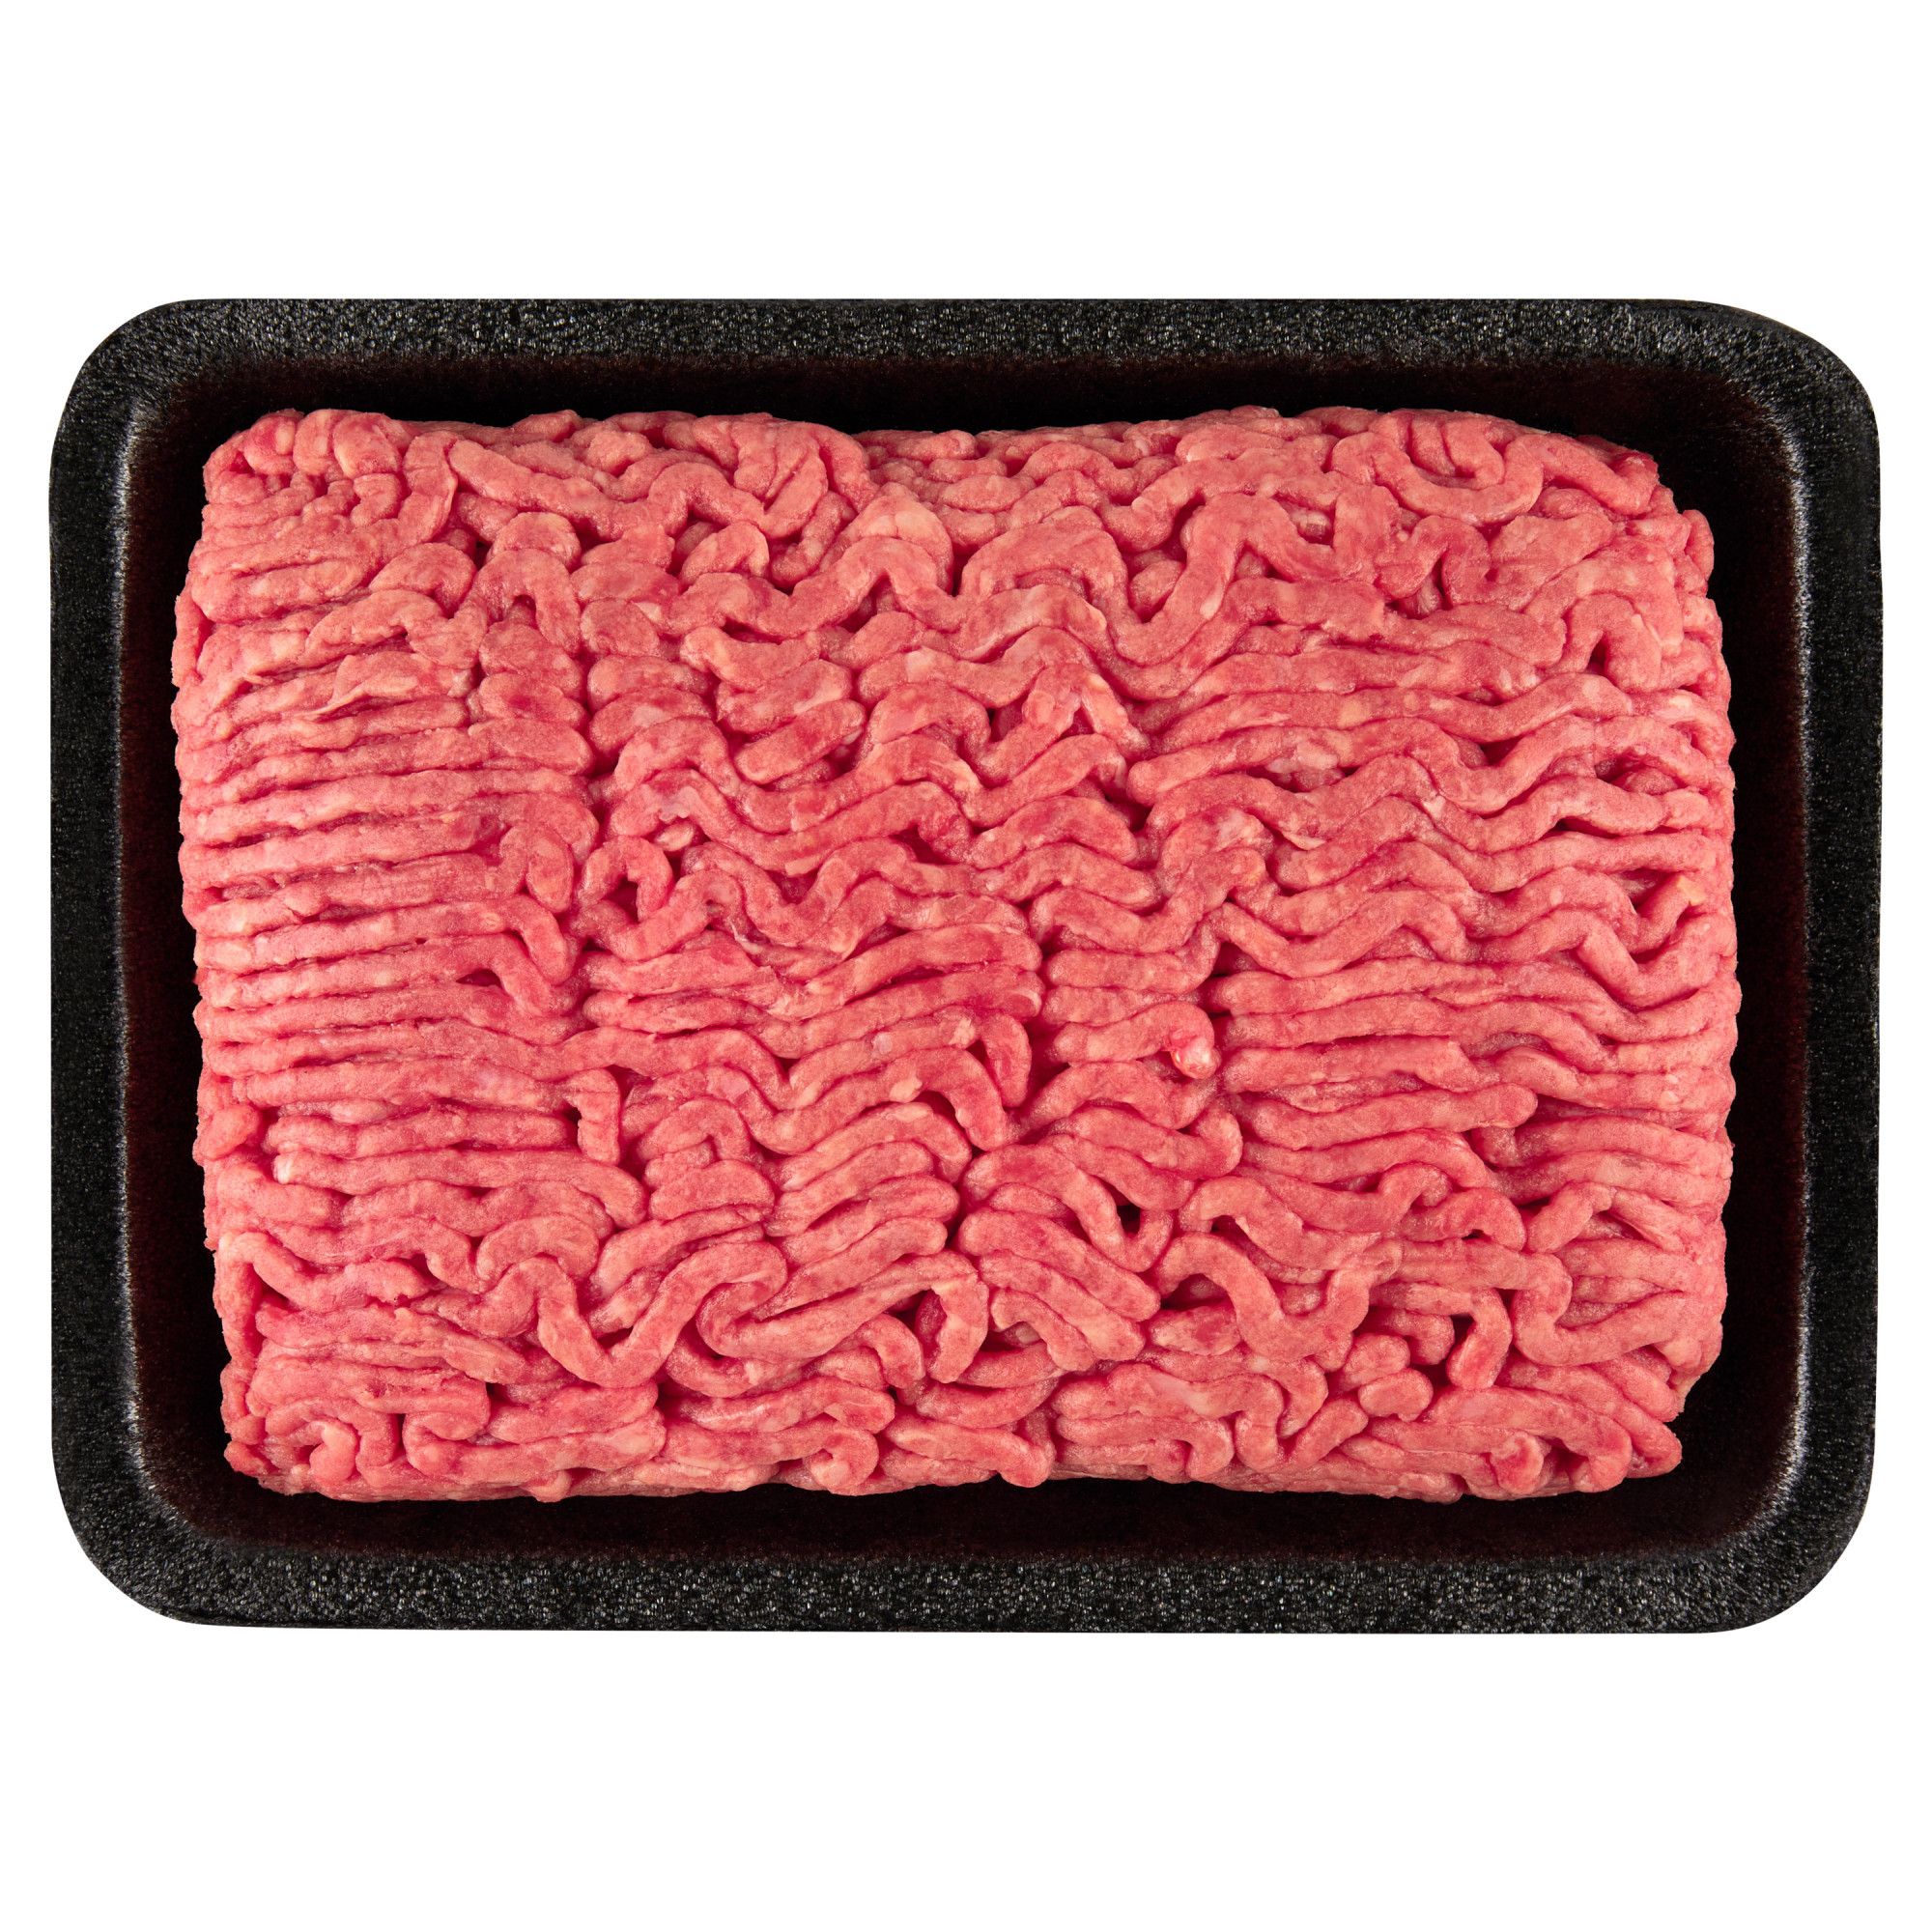 All Natural* 80% Lean/20% Fat Ground Beef Chuck, 1 lb Tray - image 2 of 8